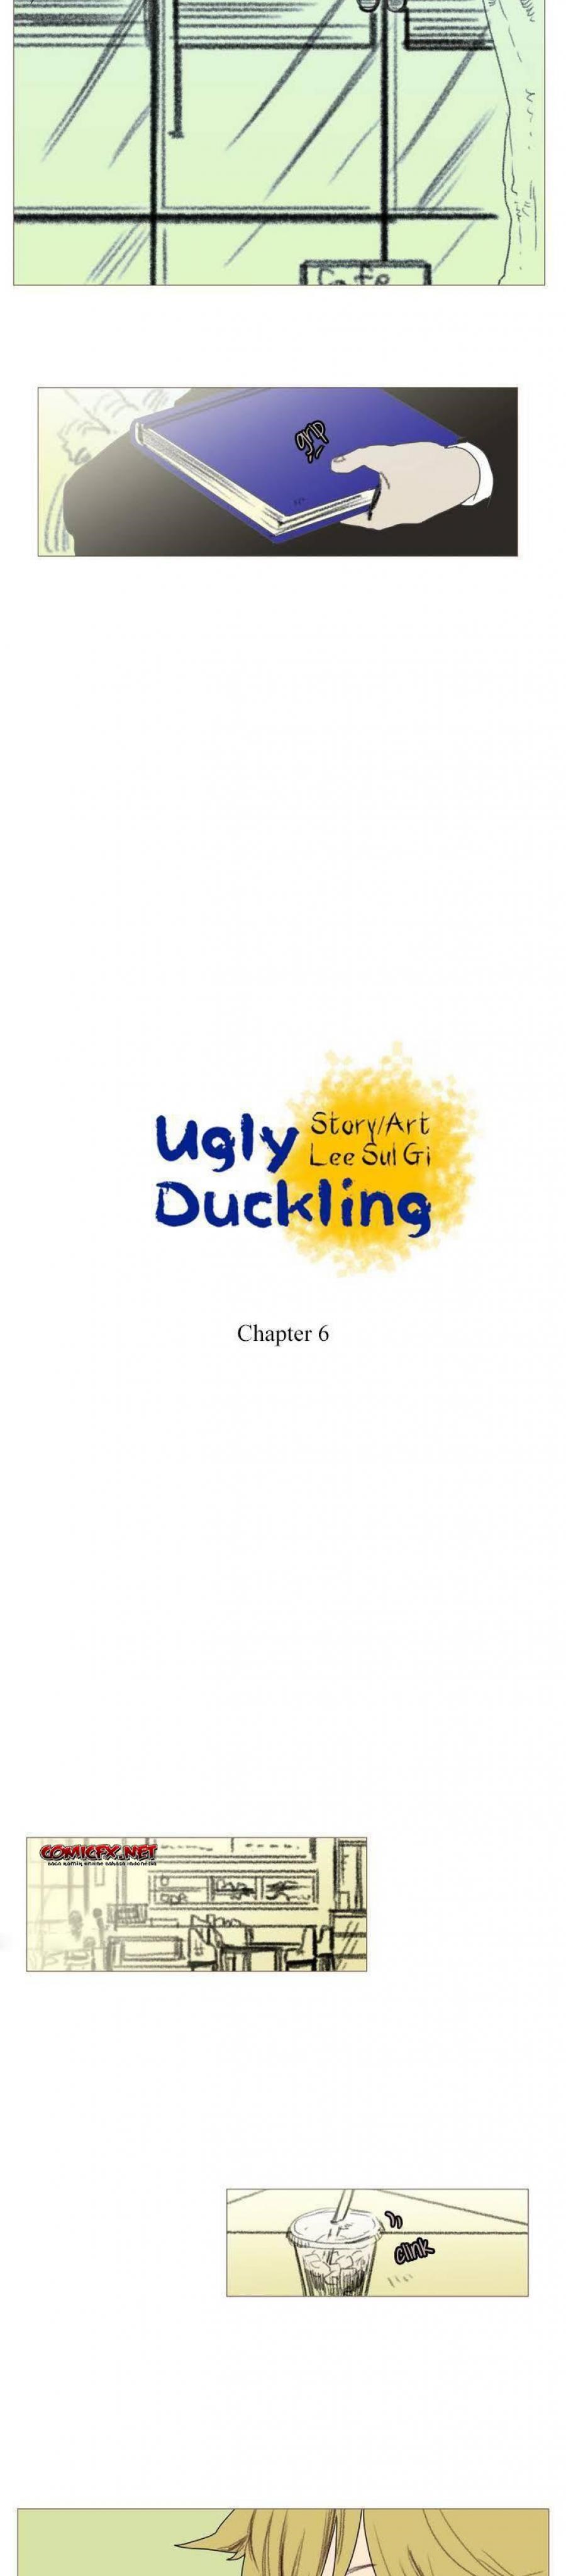 Ugly Duckling Chapter 6